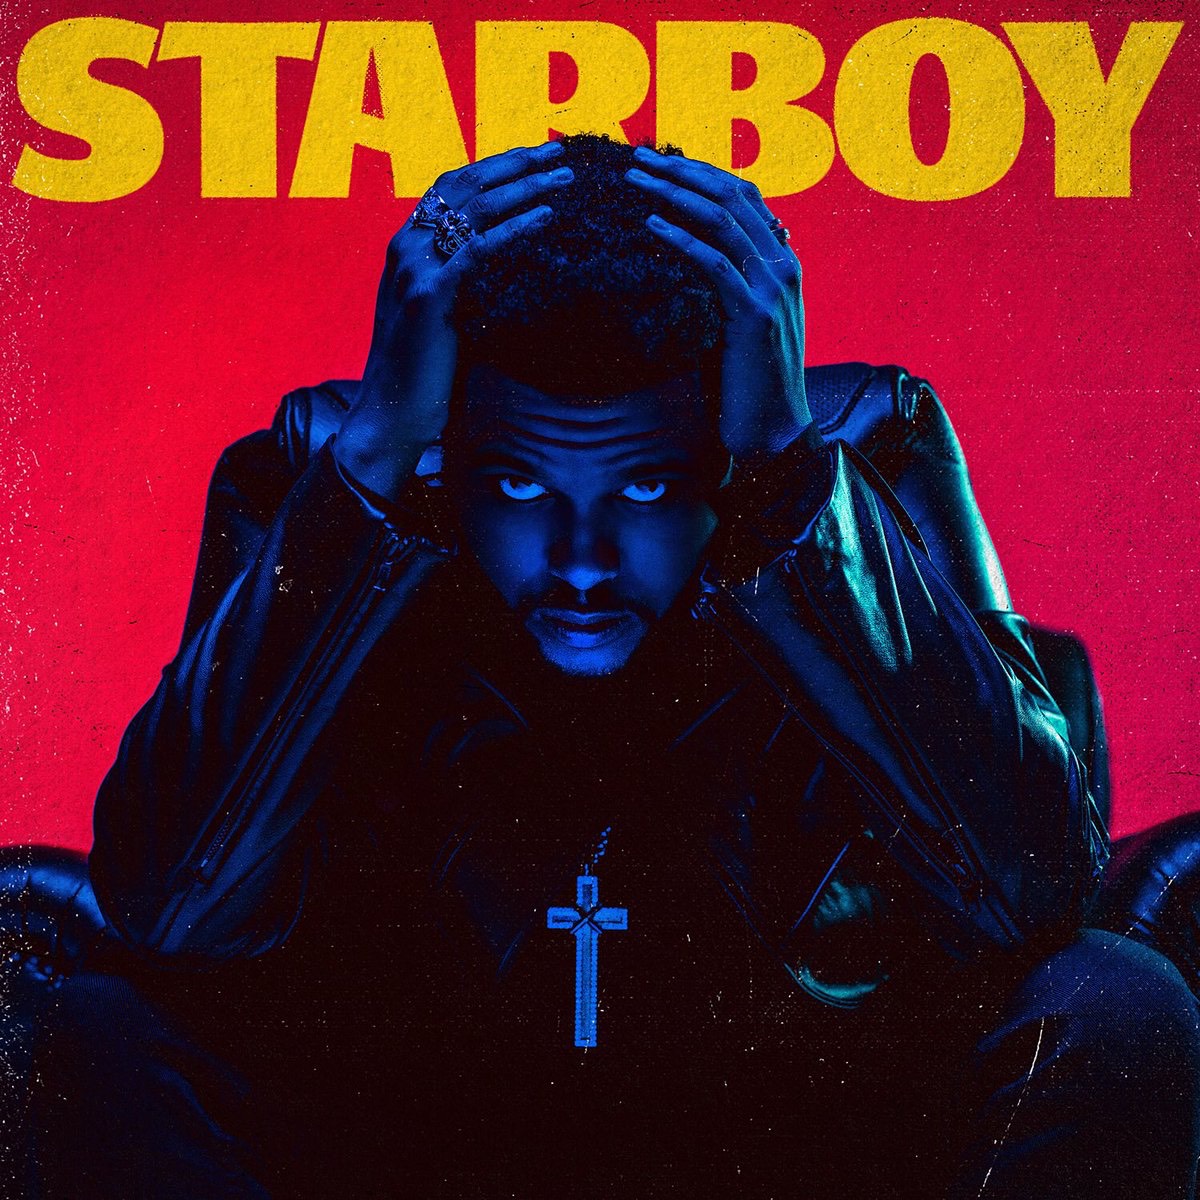 The Weeknd - Starboy cover